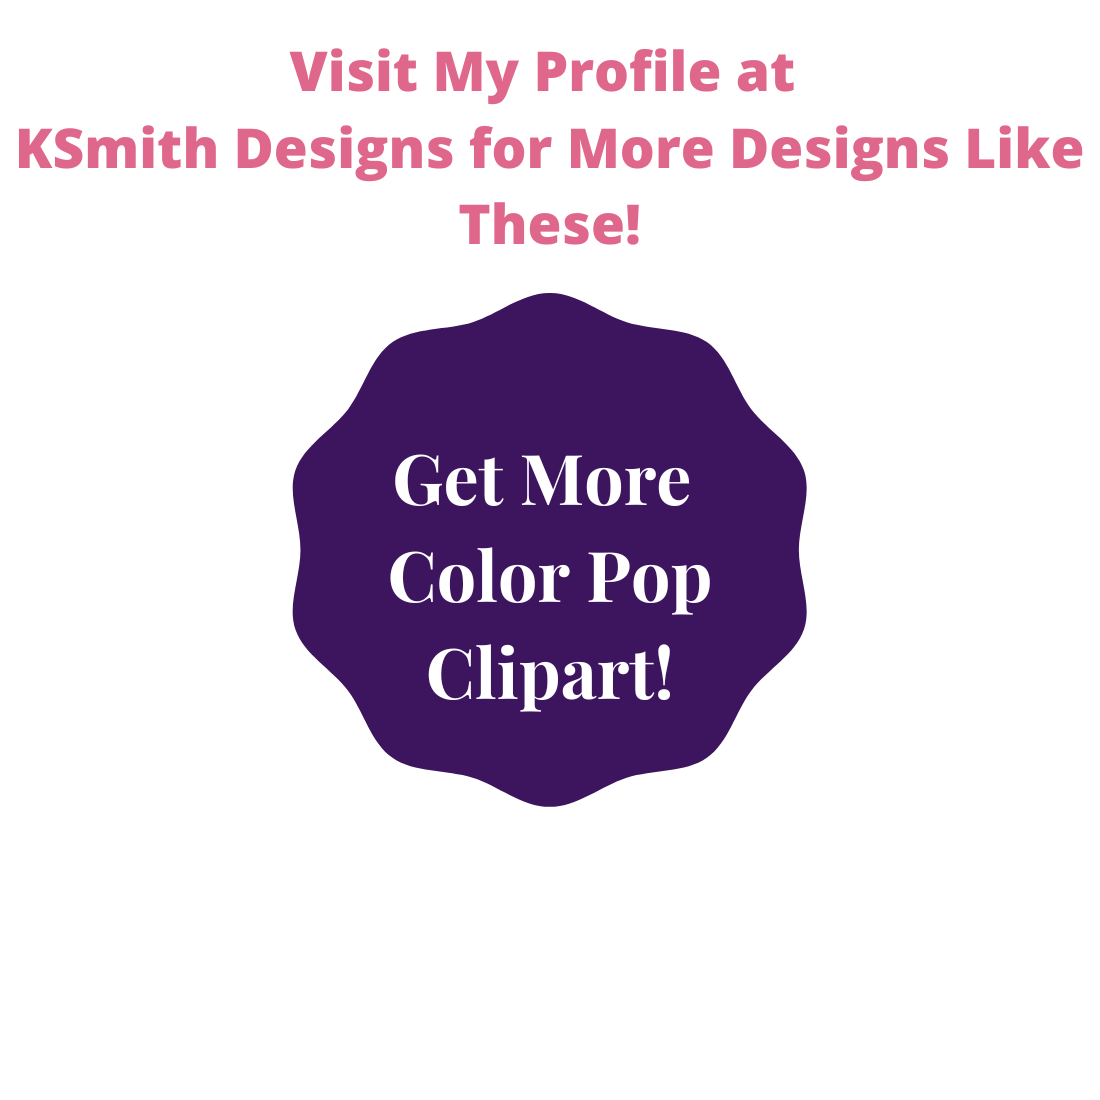 16 COLOR POP CLIPART IMAGES OF GLASS preview image.